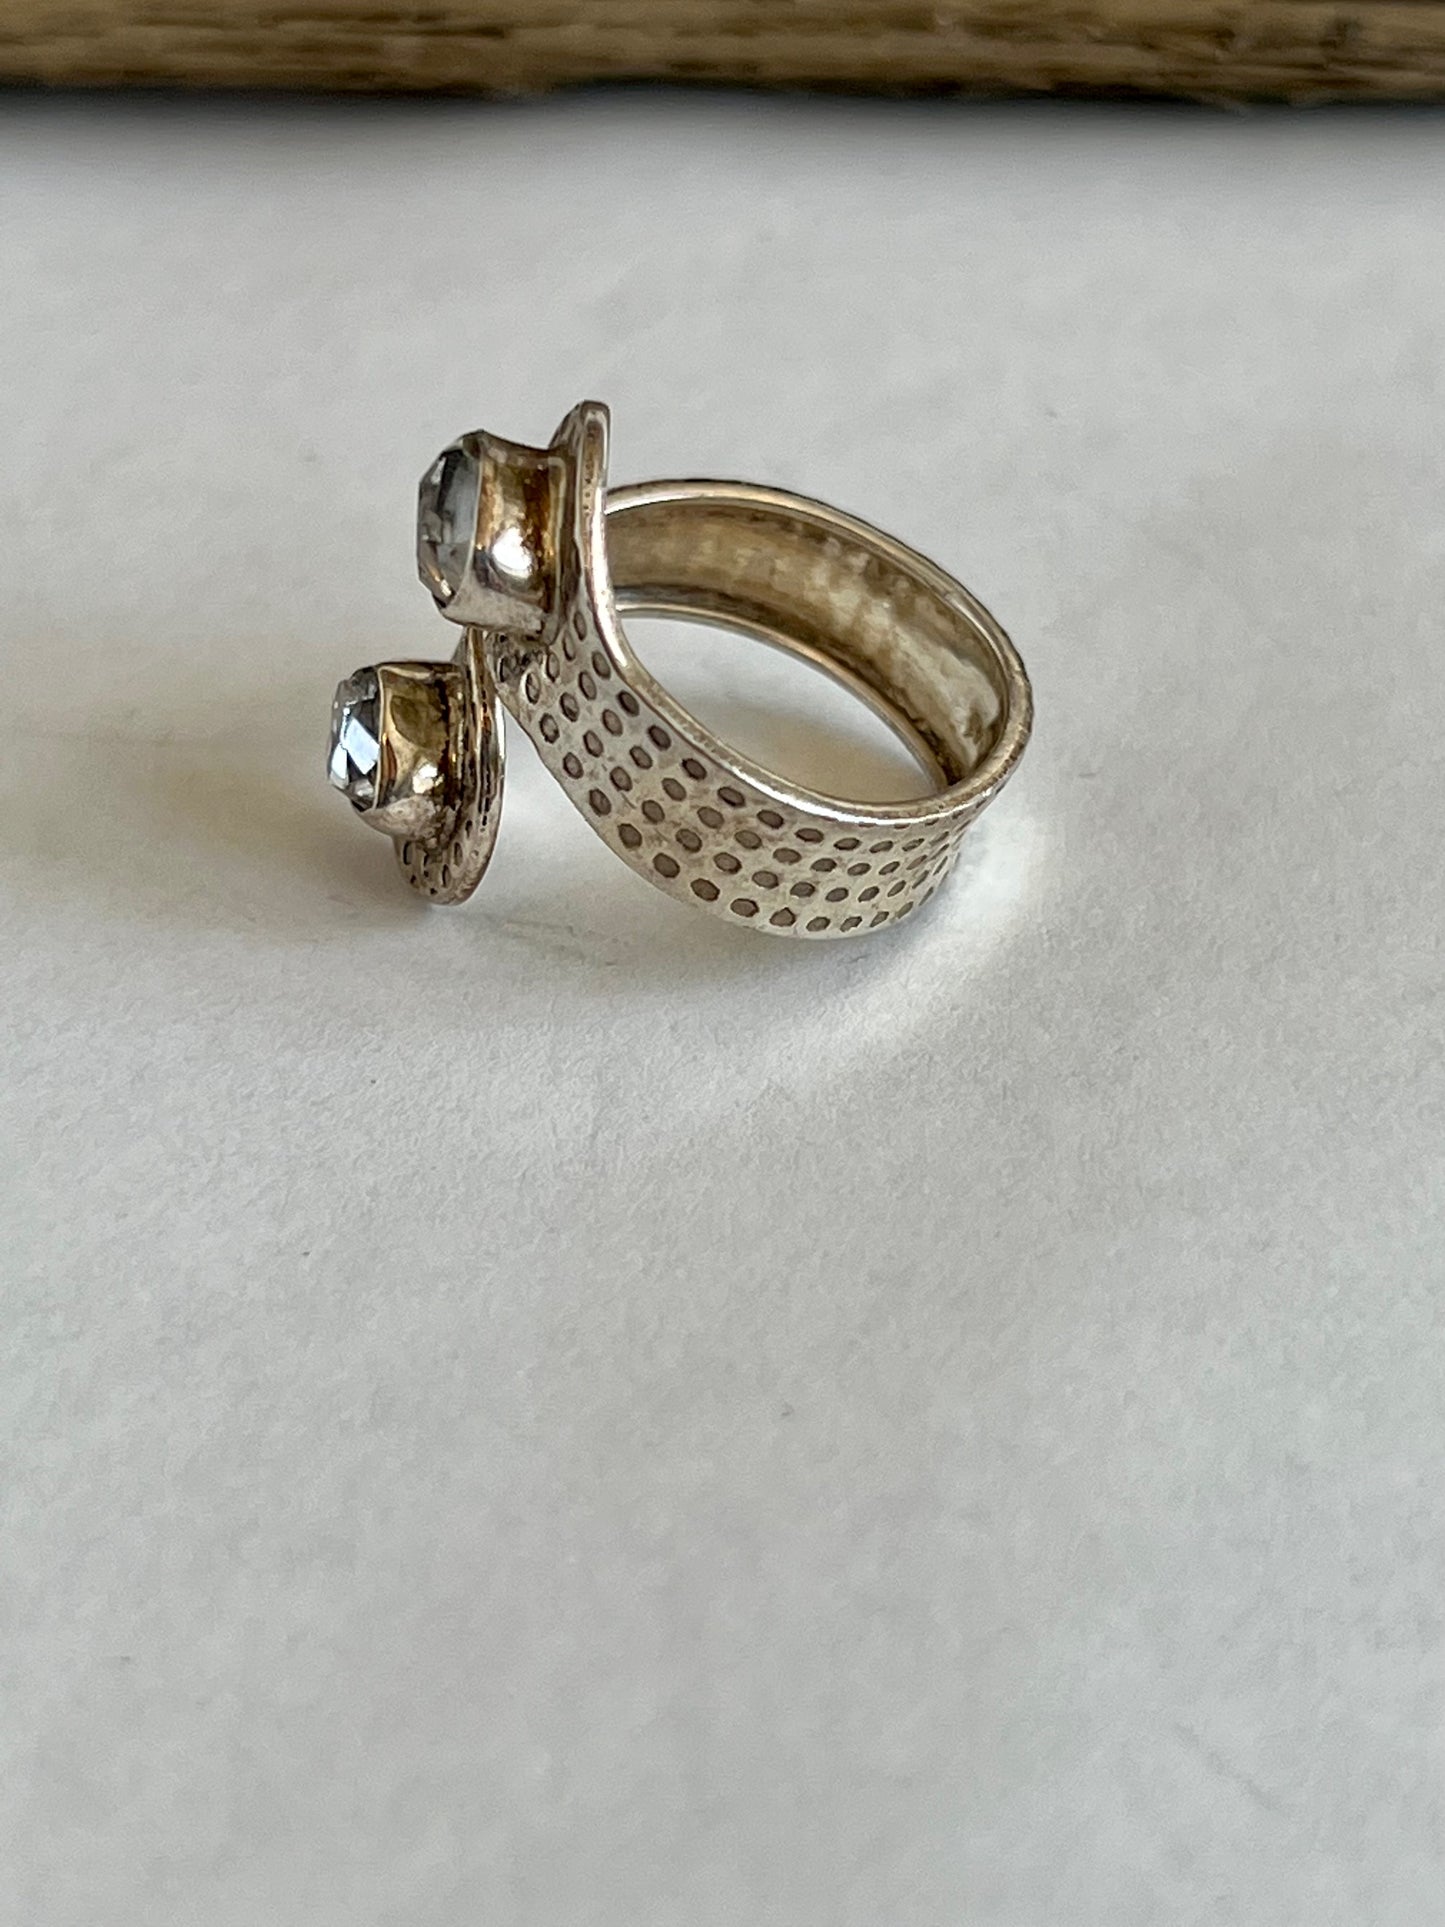 Rings size adjustable